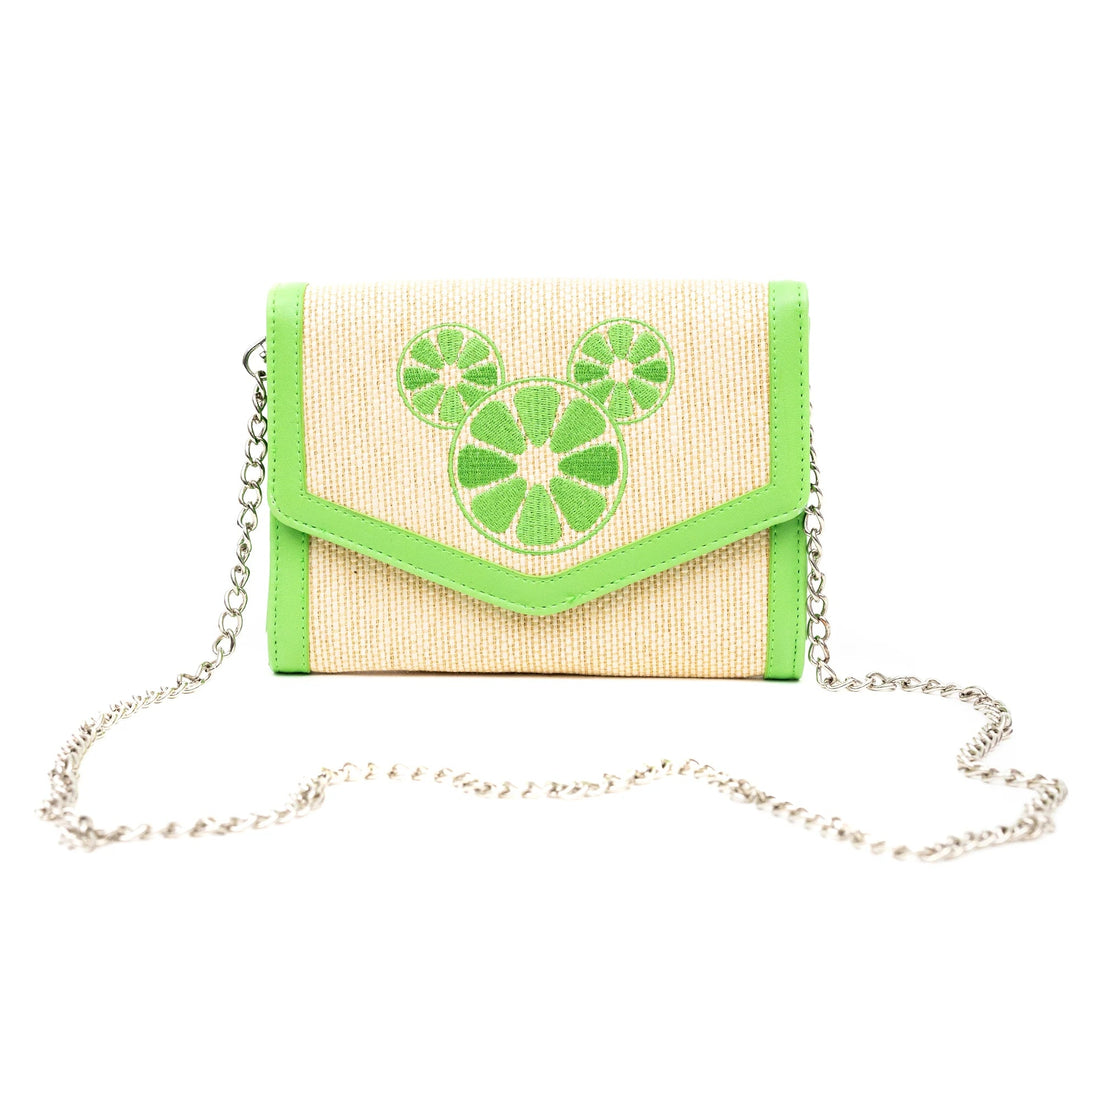 Shop Buckle Down Mickey Mouse Lime Raffia Cross Body Bag - Premium Cross Body Bag from Buckle Down Products Online now at Spoiled Brat 